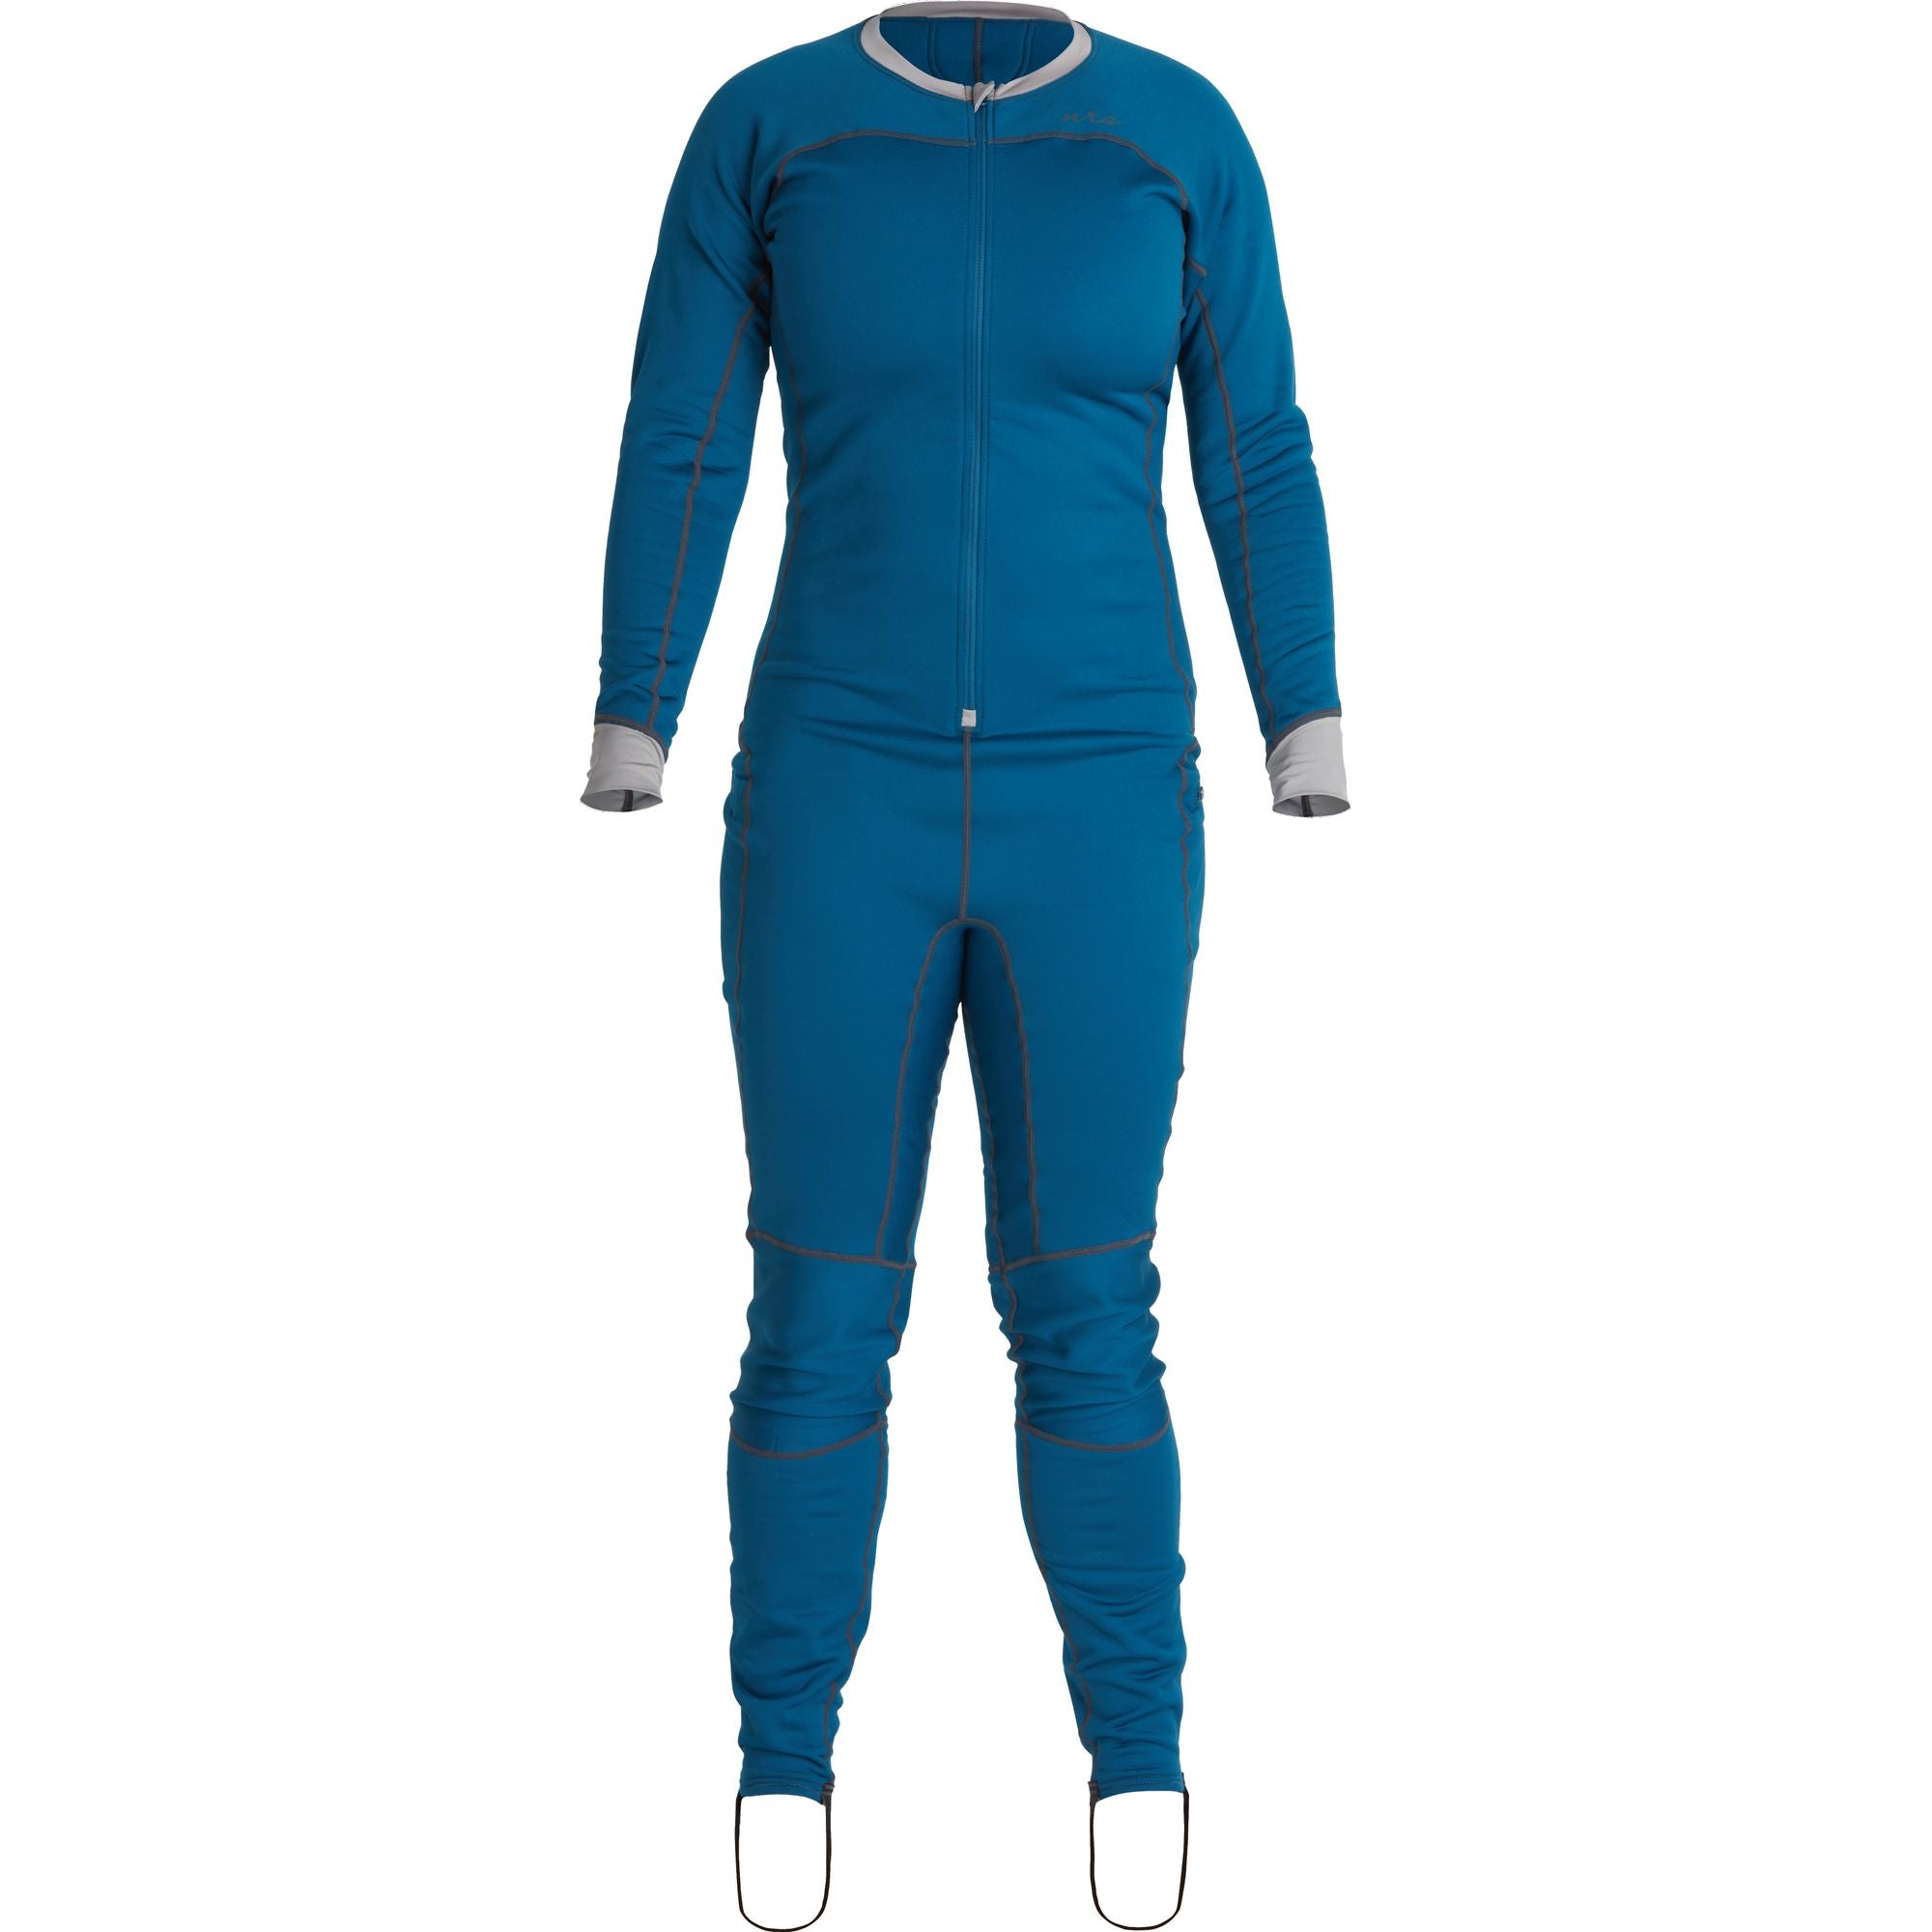 NRS - Womens Expedition Weight Union Suit